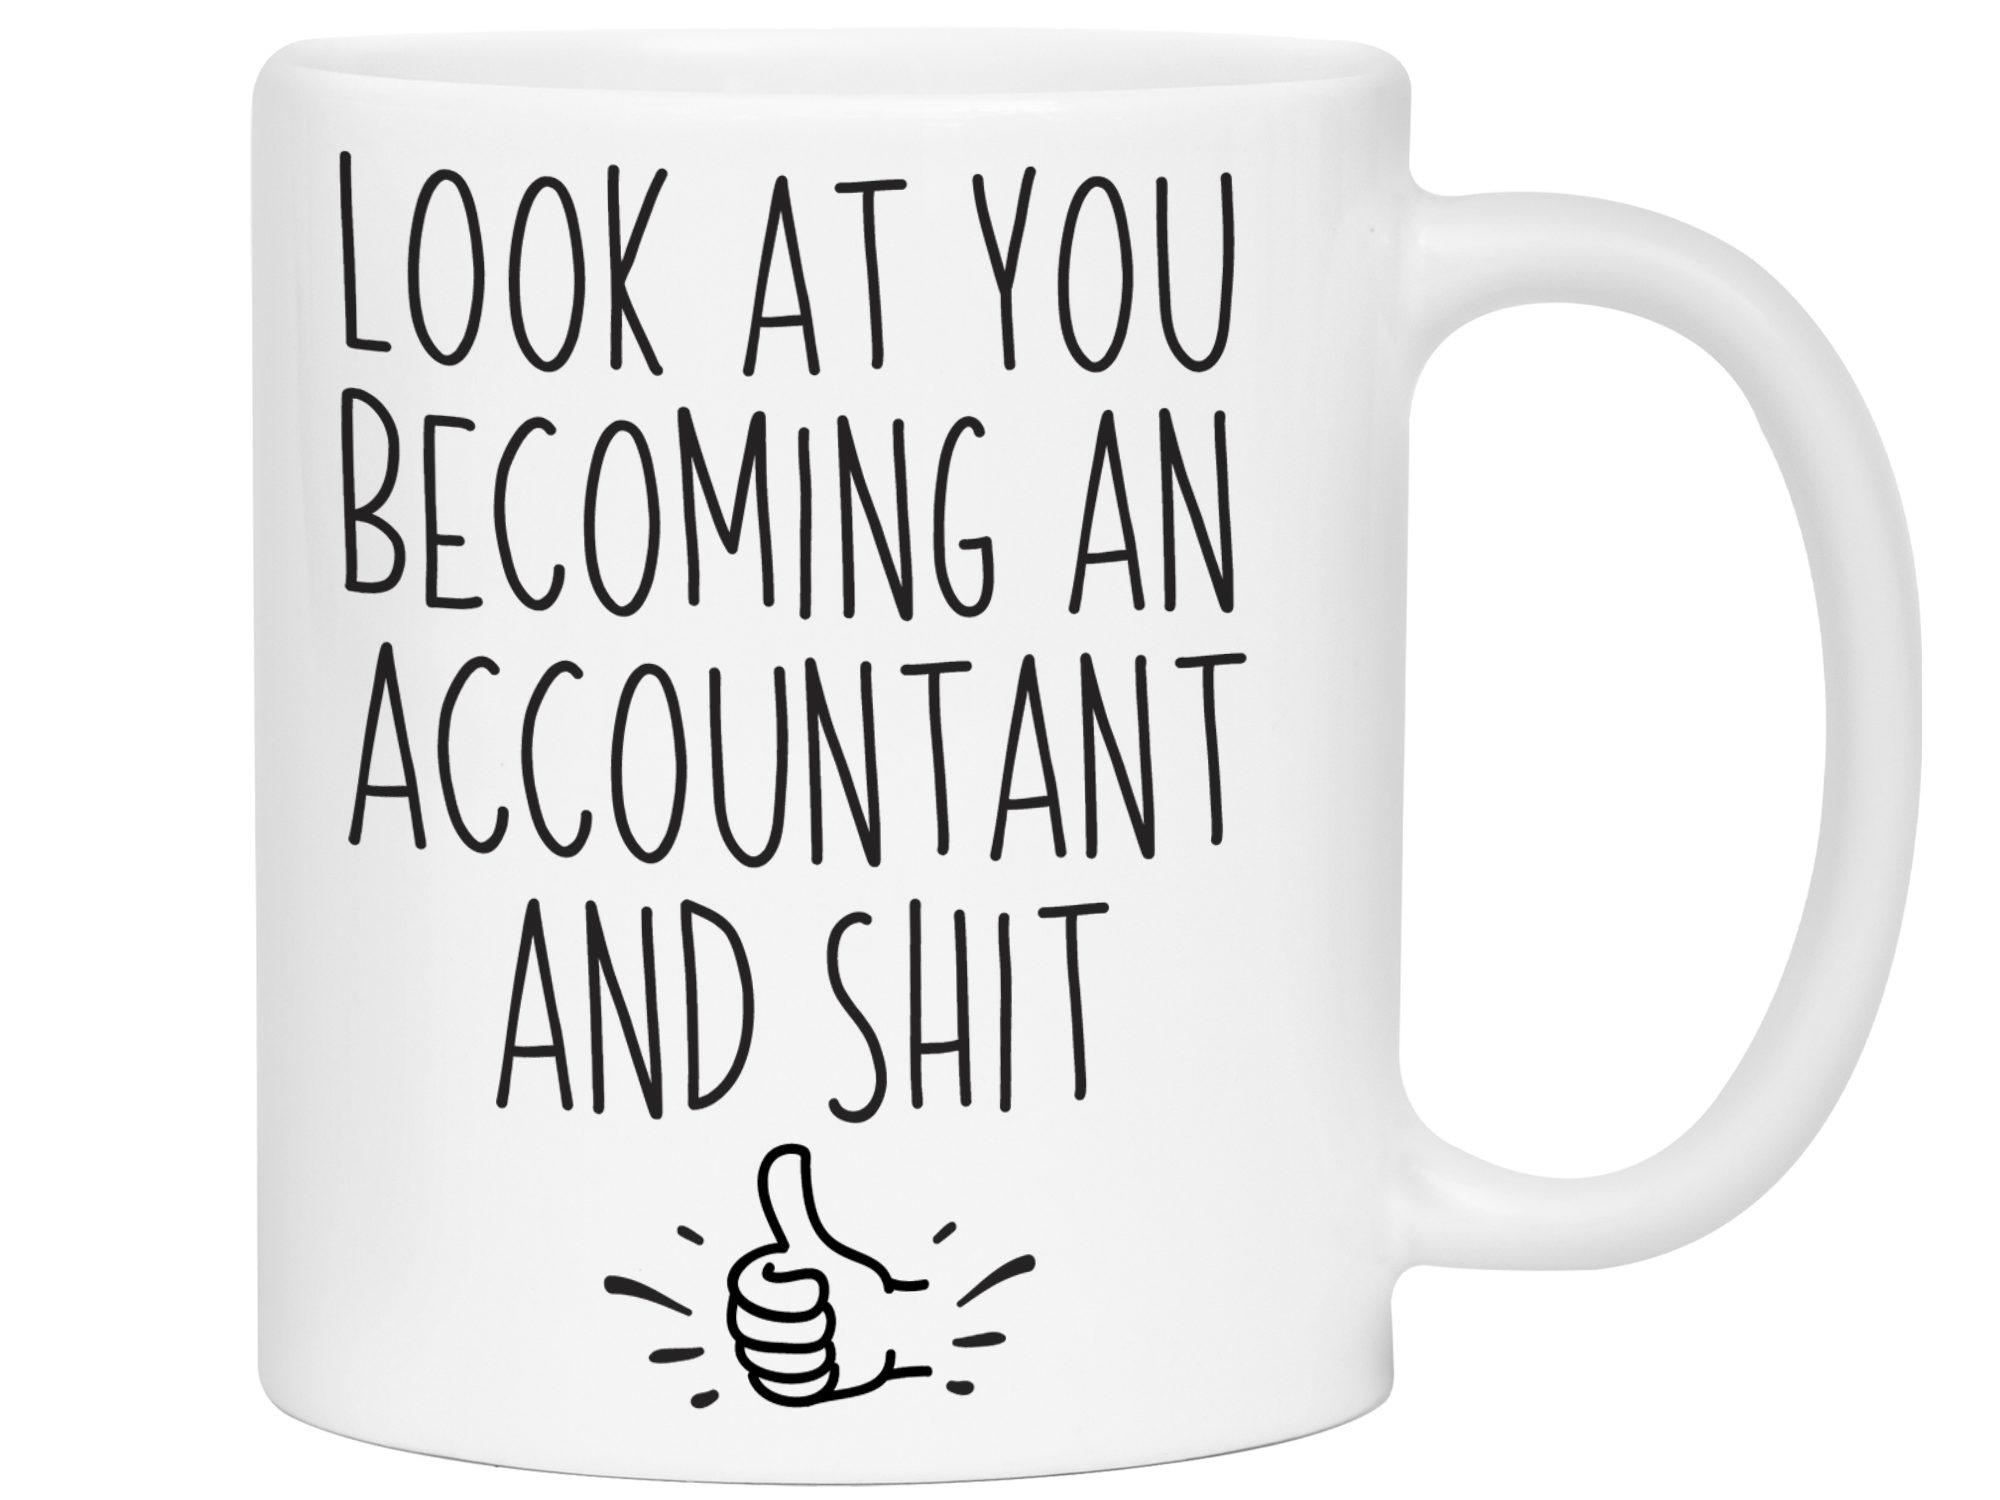 Graduation Gifts for Accountants - Look at You Becoming an Accountant and Shit Funny Coffee Mug